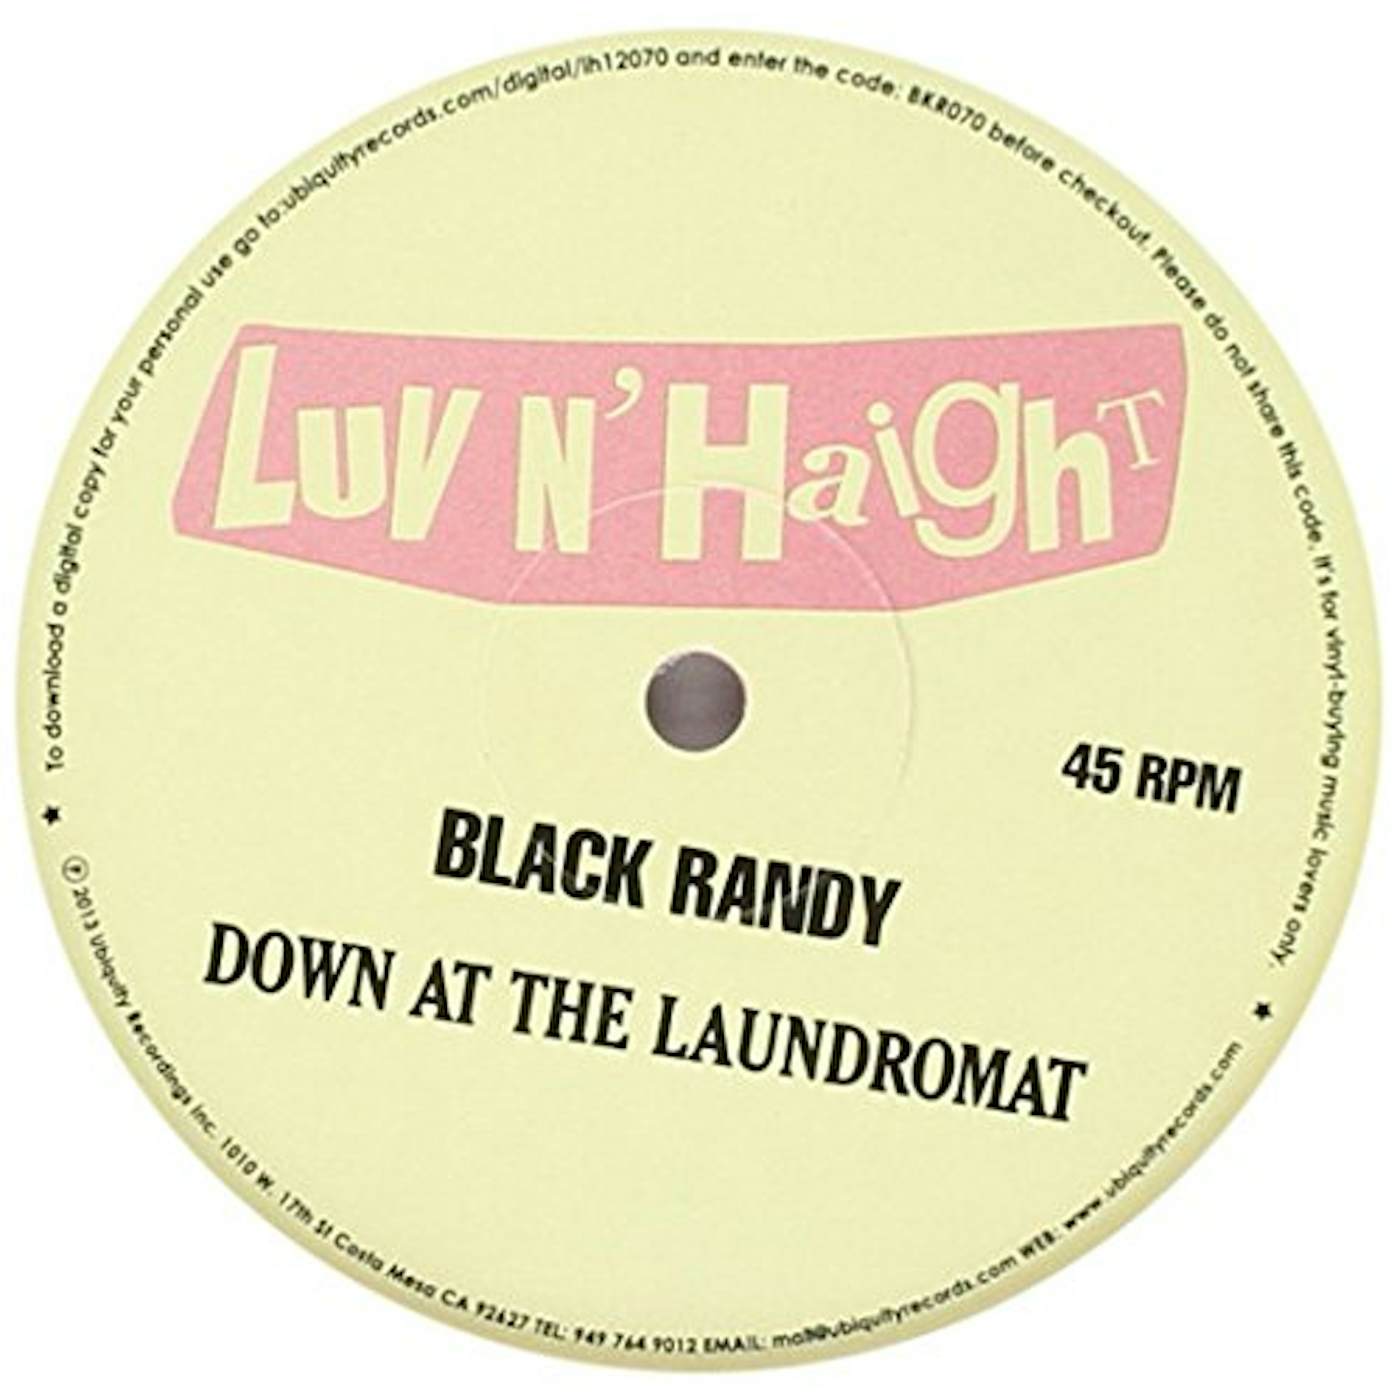 Black Randy LAUNDROMAT B/W GIVE IT UP OR TURN IT LOOSE Vinyl Record